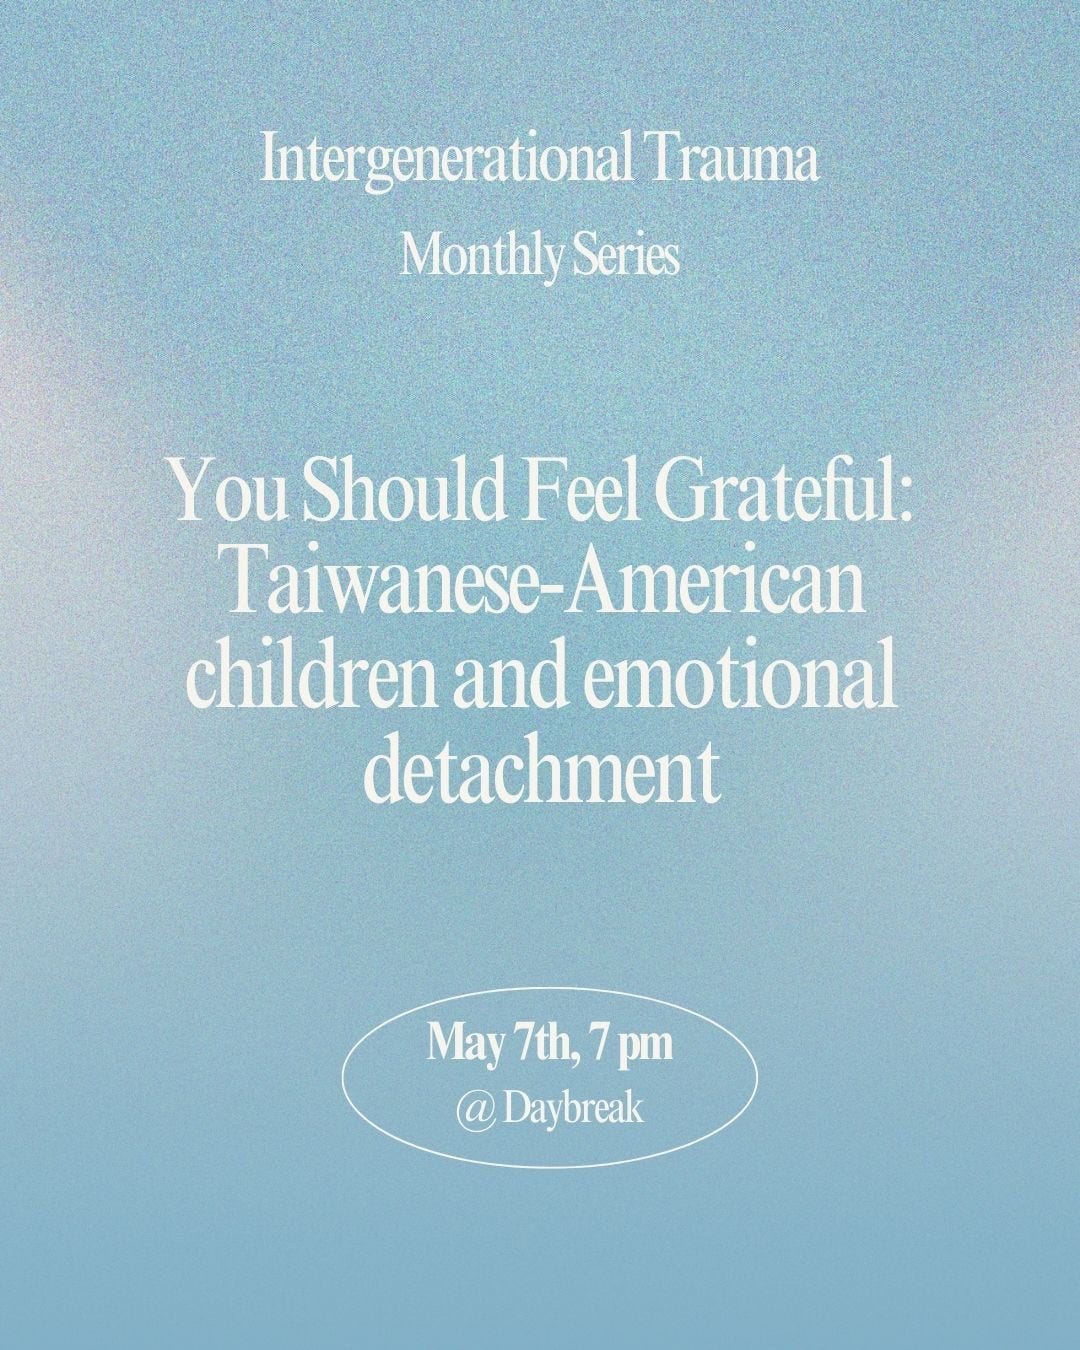 May be an image of text that says 'Intergenerational Trauma Monthly Series You Should Feel Grateful: Taiwanese-American -American Taiwanese- children and emotional detachment May 7th, 7pm 7 pm @ Daybreak'